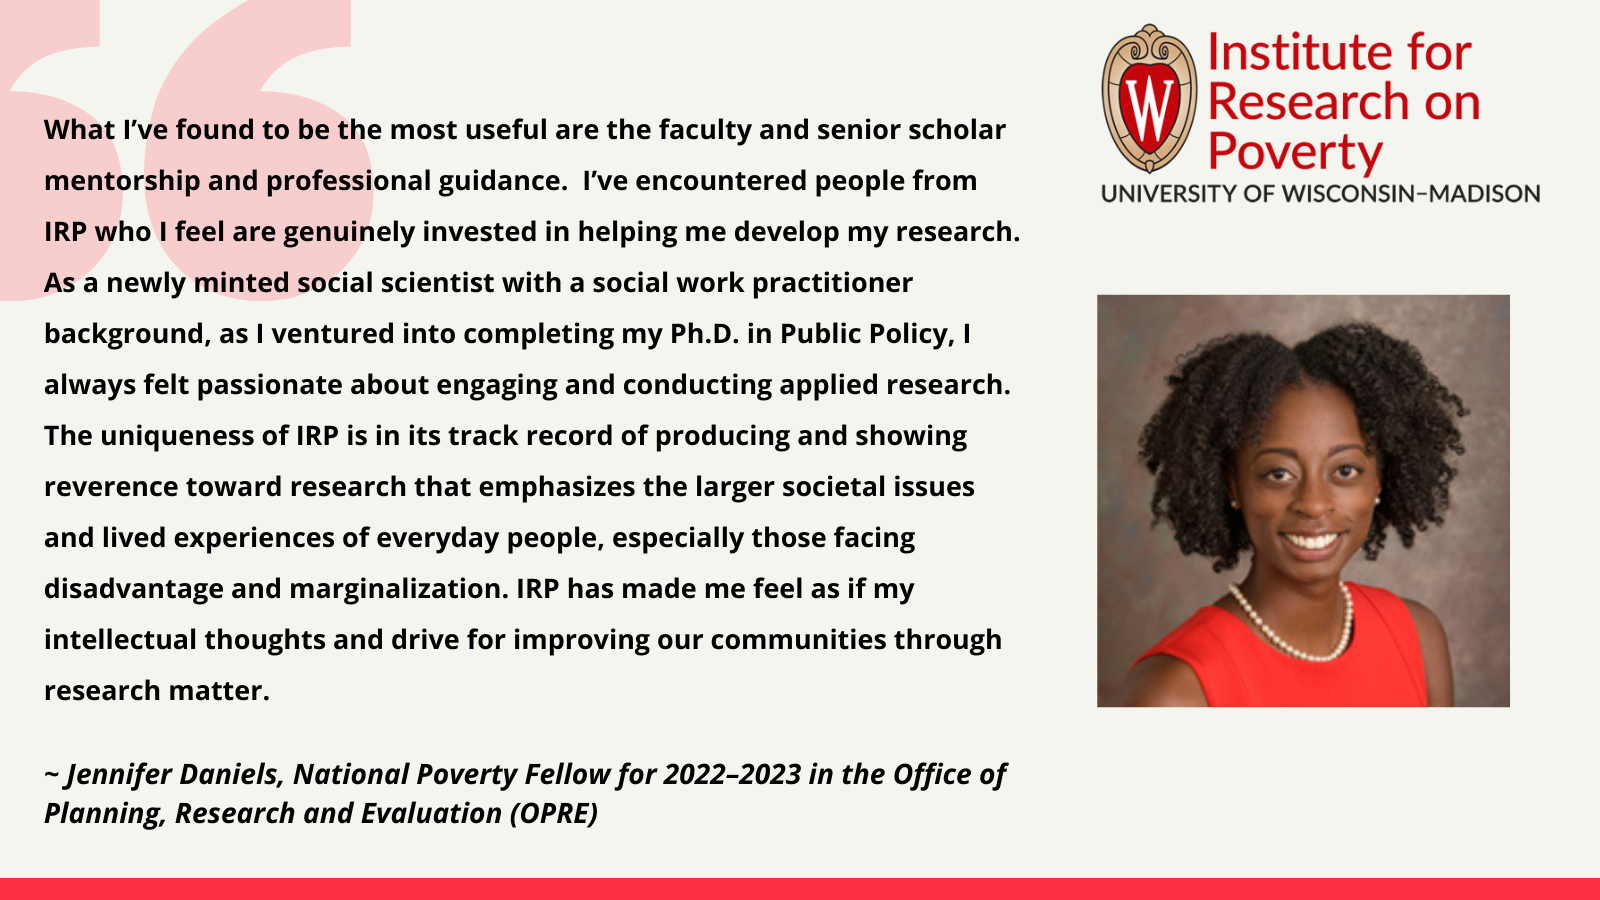 Jennifer Daniels, National Poverty Fellow for 2022–2023 in the Office of Planning, Research and Evaluation (OPRE): What I’ve found to be the most useful are the faculty and senior scholar mentorship and professional guidance. I’ve encountered people from IRP who I feel are genuinely invested in helping me develop my research. As a newly minted social scientist with a social work practitioner background, as I ventured into completing my Ph.D. in Public Policy, I always felt passionate about engaging and conducting applied research. The uniqueness of IRP is in its track record of producing and showing reverence toward research that emphasizes the larger societal issues and lived experiences of everyday people, especially those facing disadvantage and marginalization. IRP has made me feel as if my intellectual thoughts and drive for improving our communities through research matter.